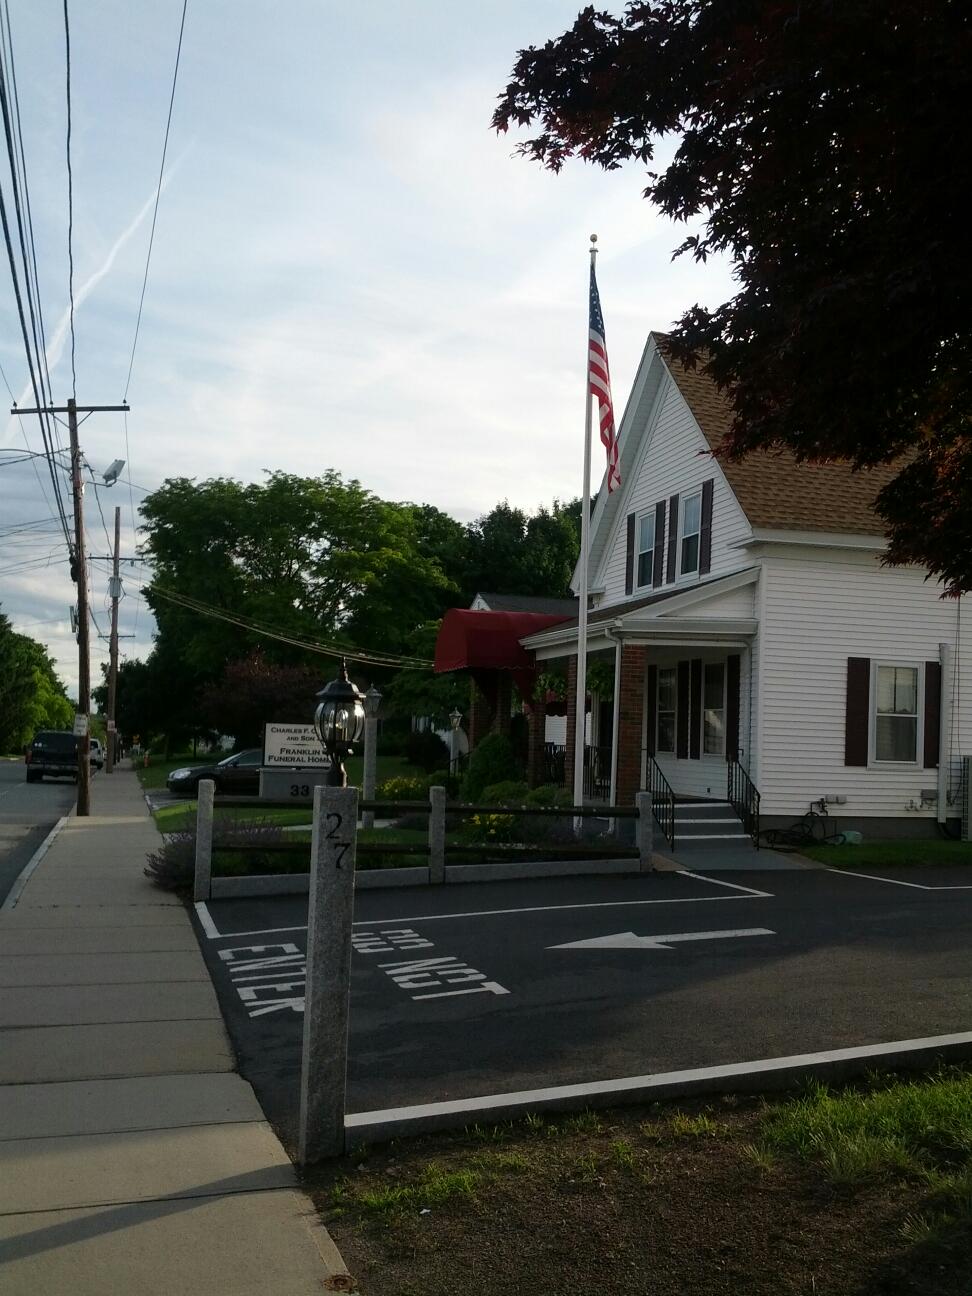 Oteri Funeral Home | 33 Cottage St #2204, Franklin, MA 02038, USA | Phone: (508) 528-0011